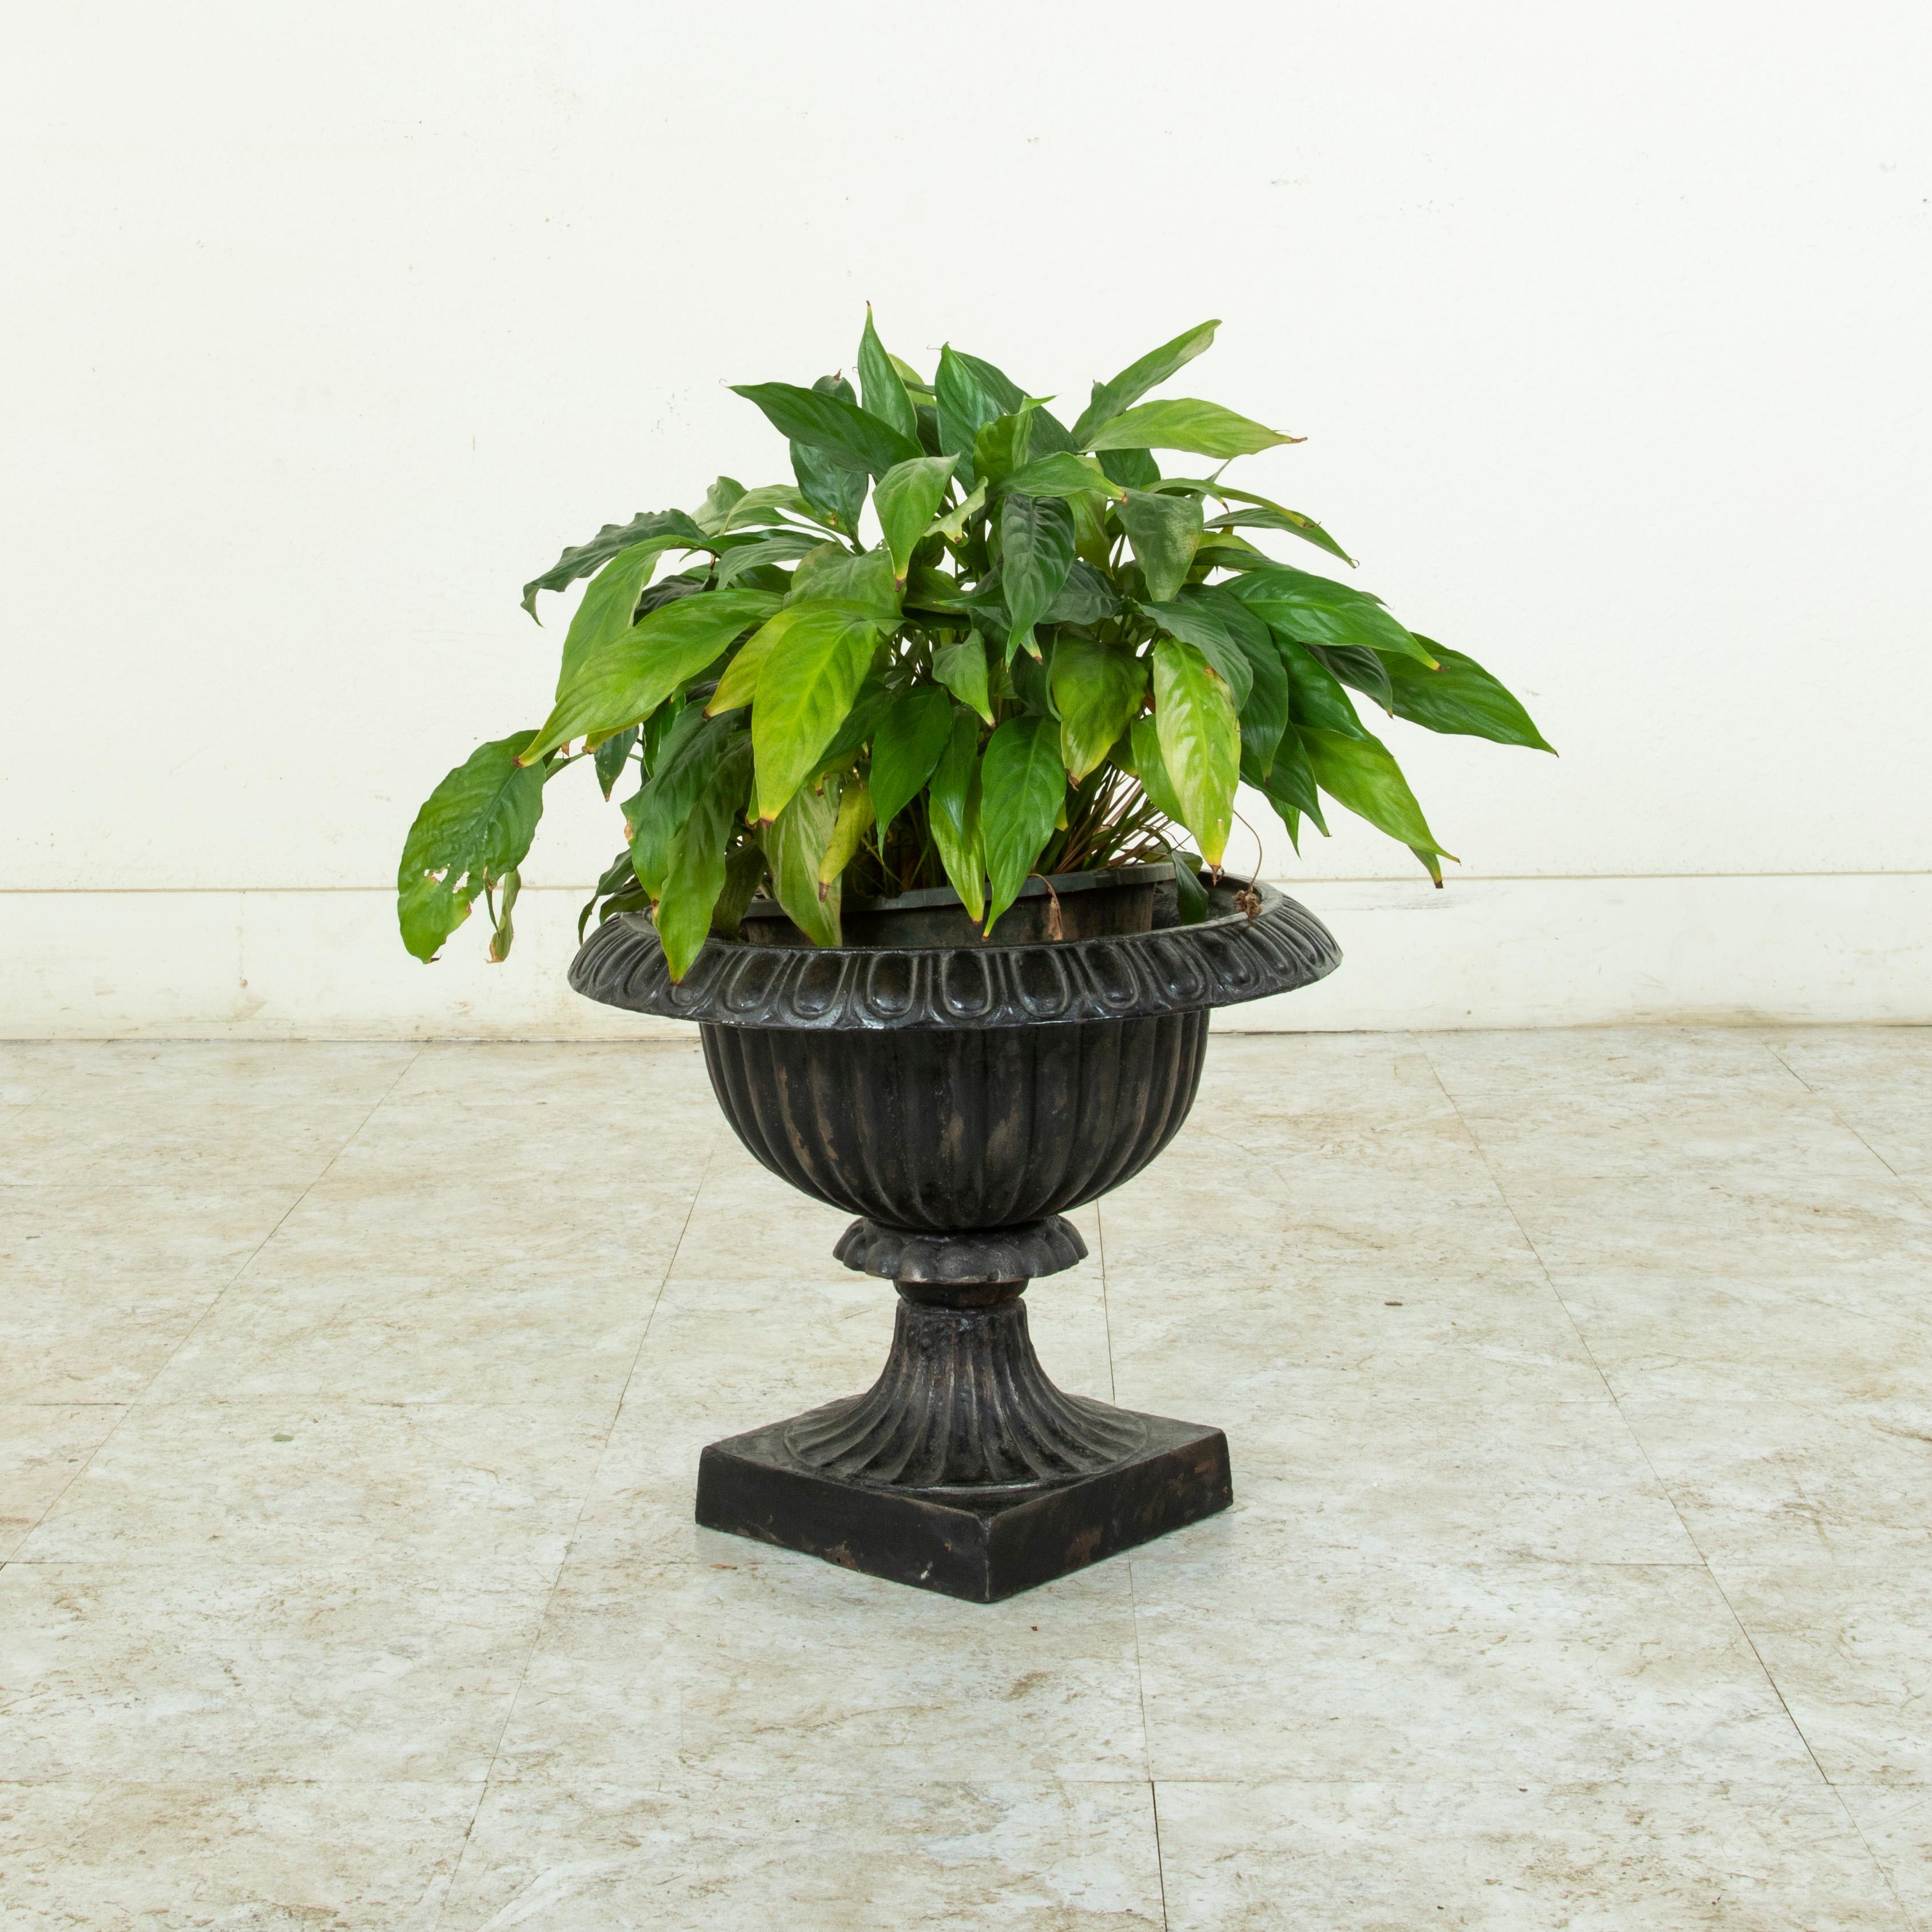 Standing at 13.5 inches in height and with a 17 inch diameter, this large French cast iron planter or jardinière from the turn of the twentieth century takes its shape from a Classic Medici urn. An egg and dart motif surrounds the rim. Its fluted